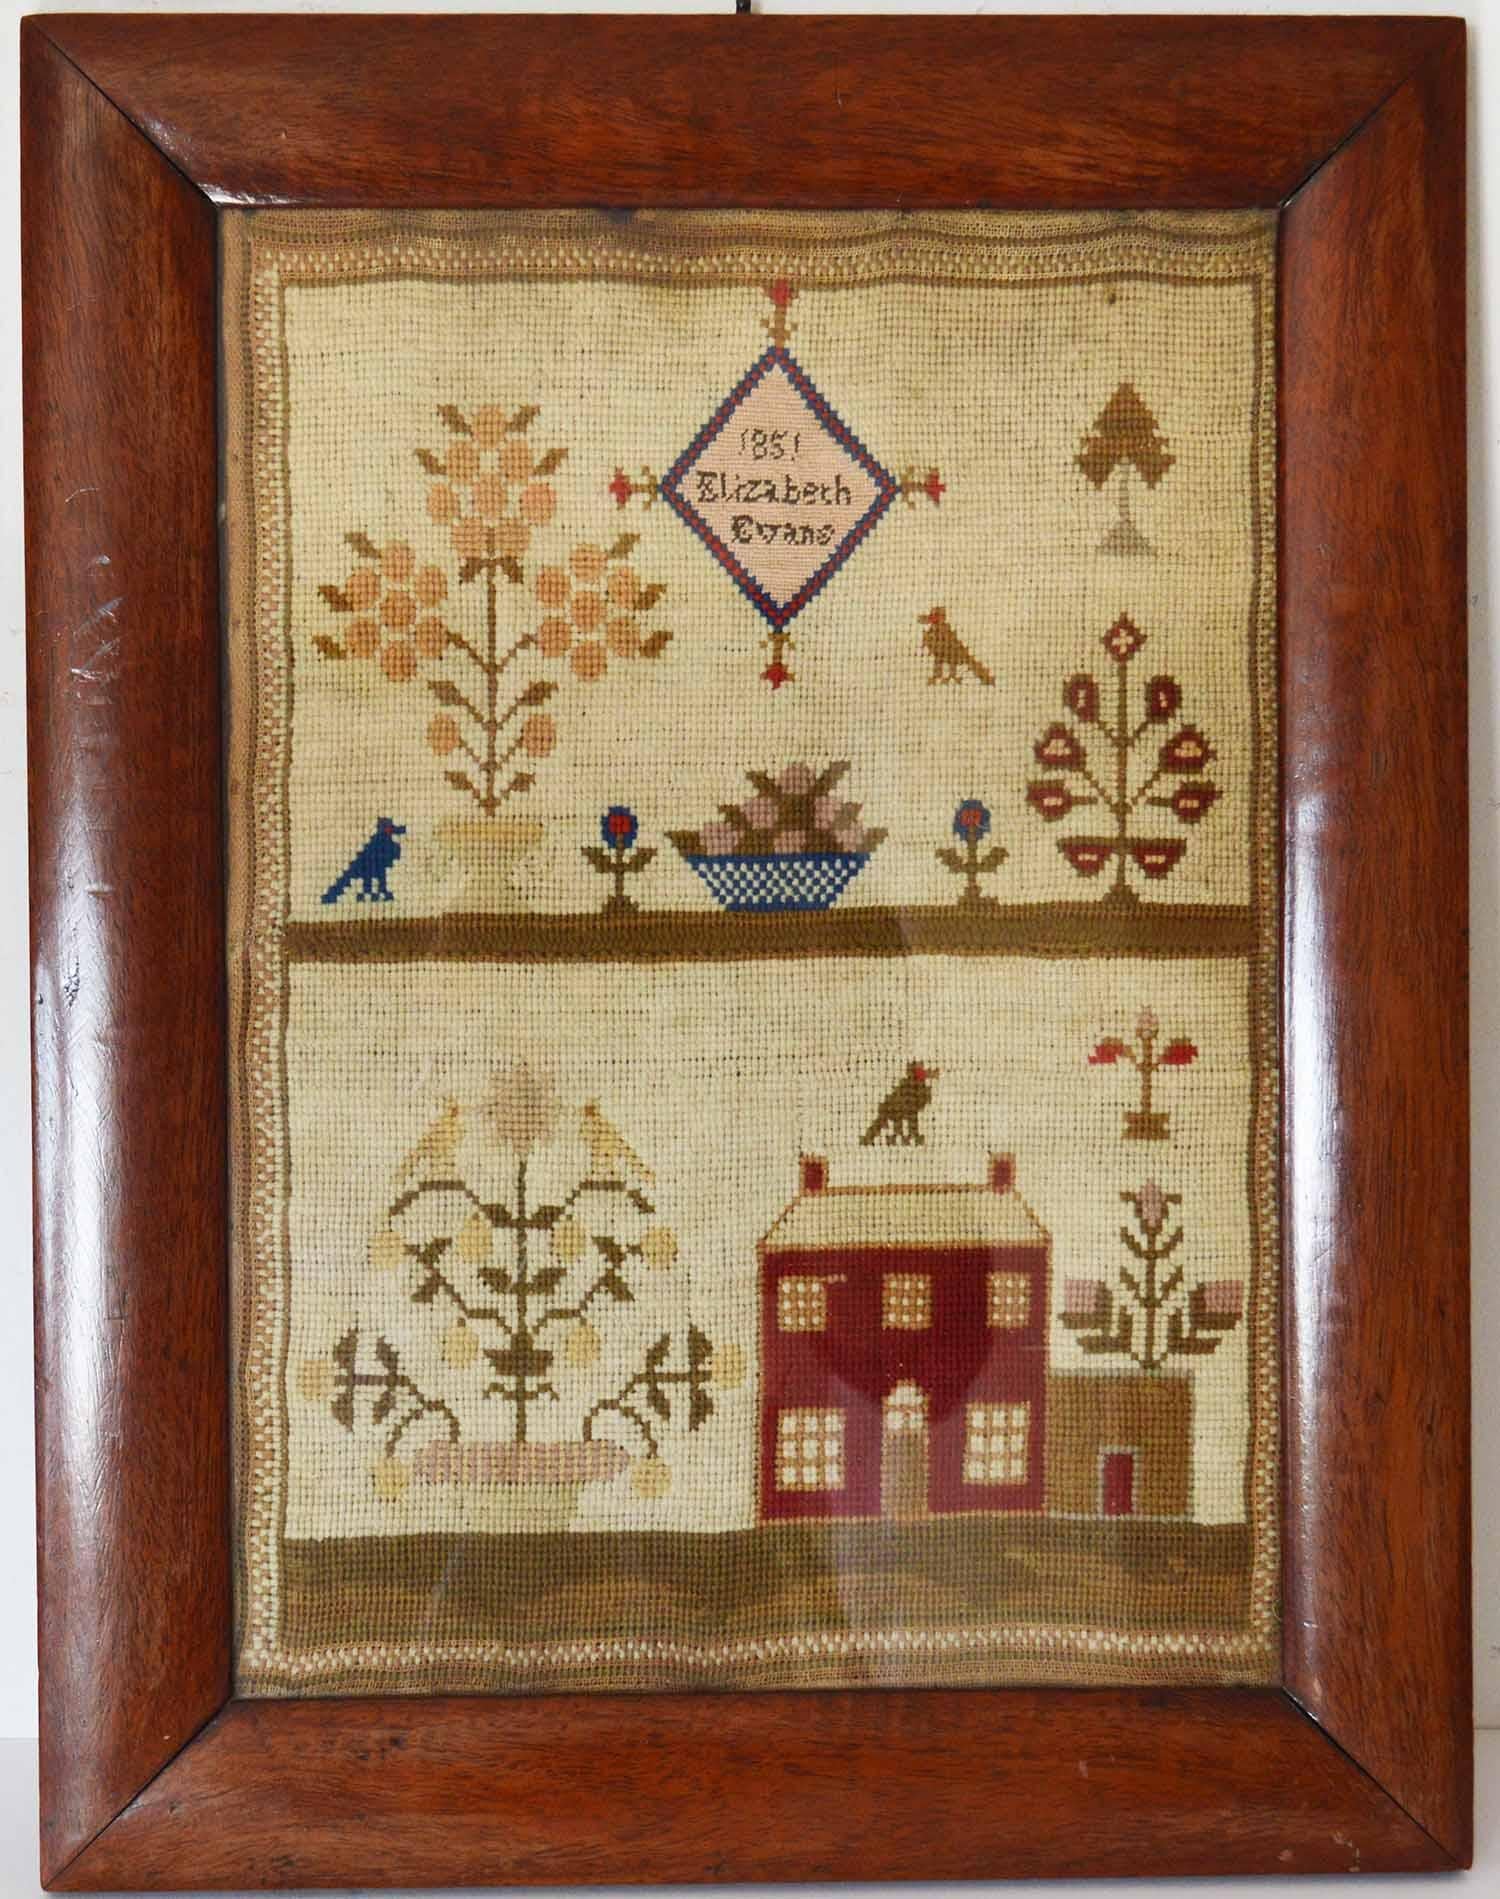 Lovely Welsh sampler with a country house.

By Elizabeth Evans, 1851

Most appealing with having the wool work of the country house as a subject.

Original rosewood frame

The measurement given below is the frame size.

